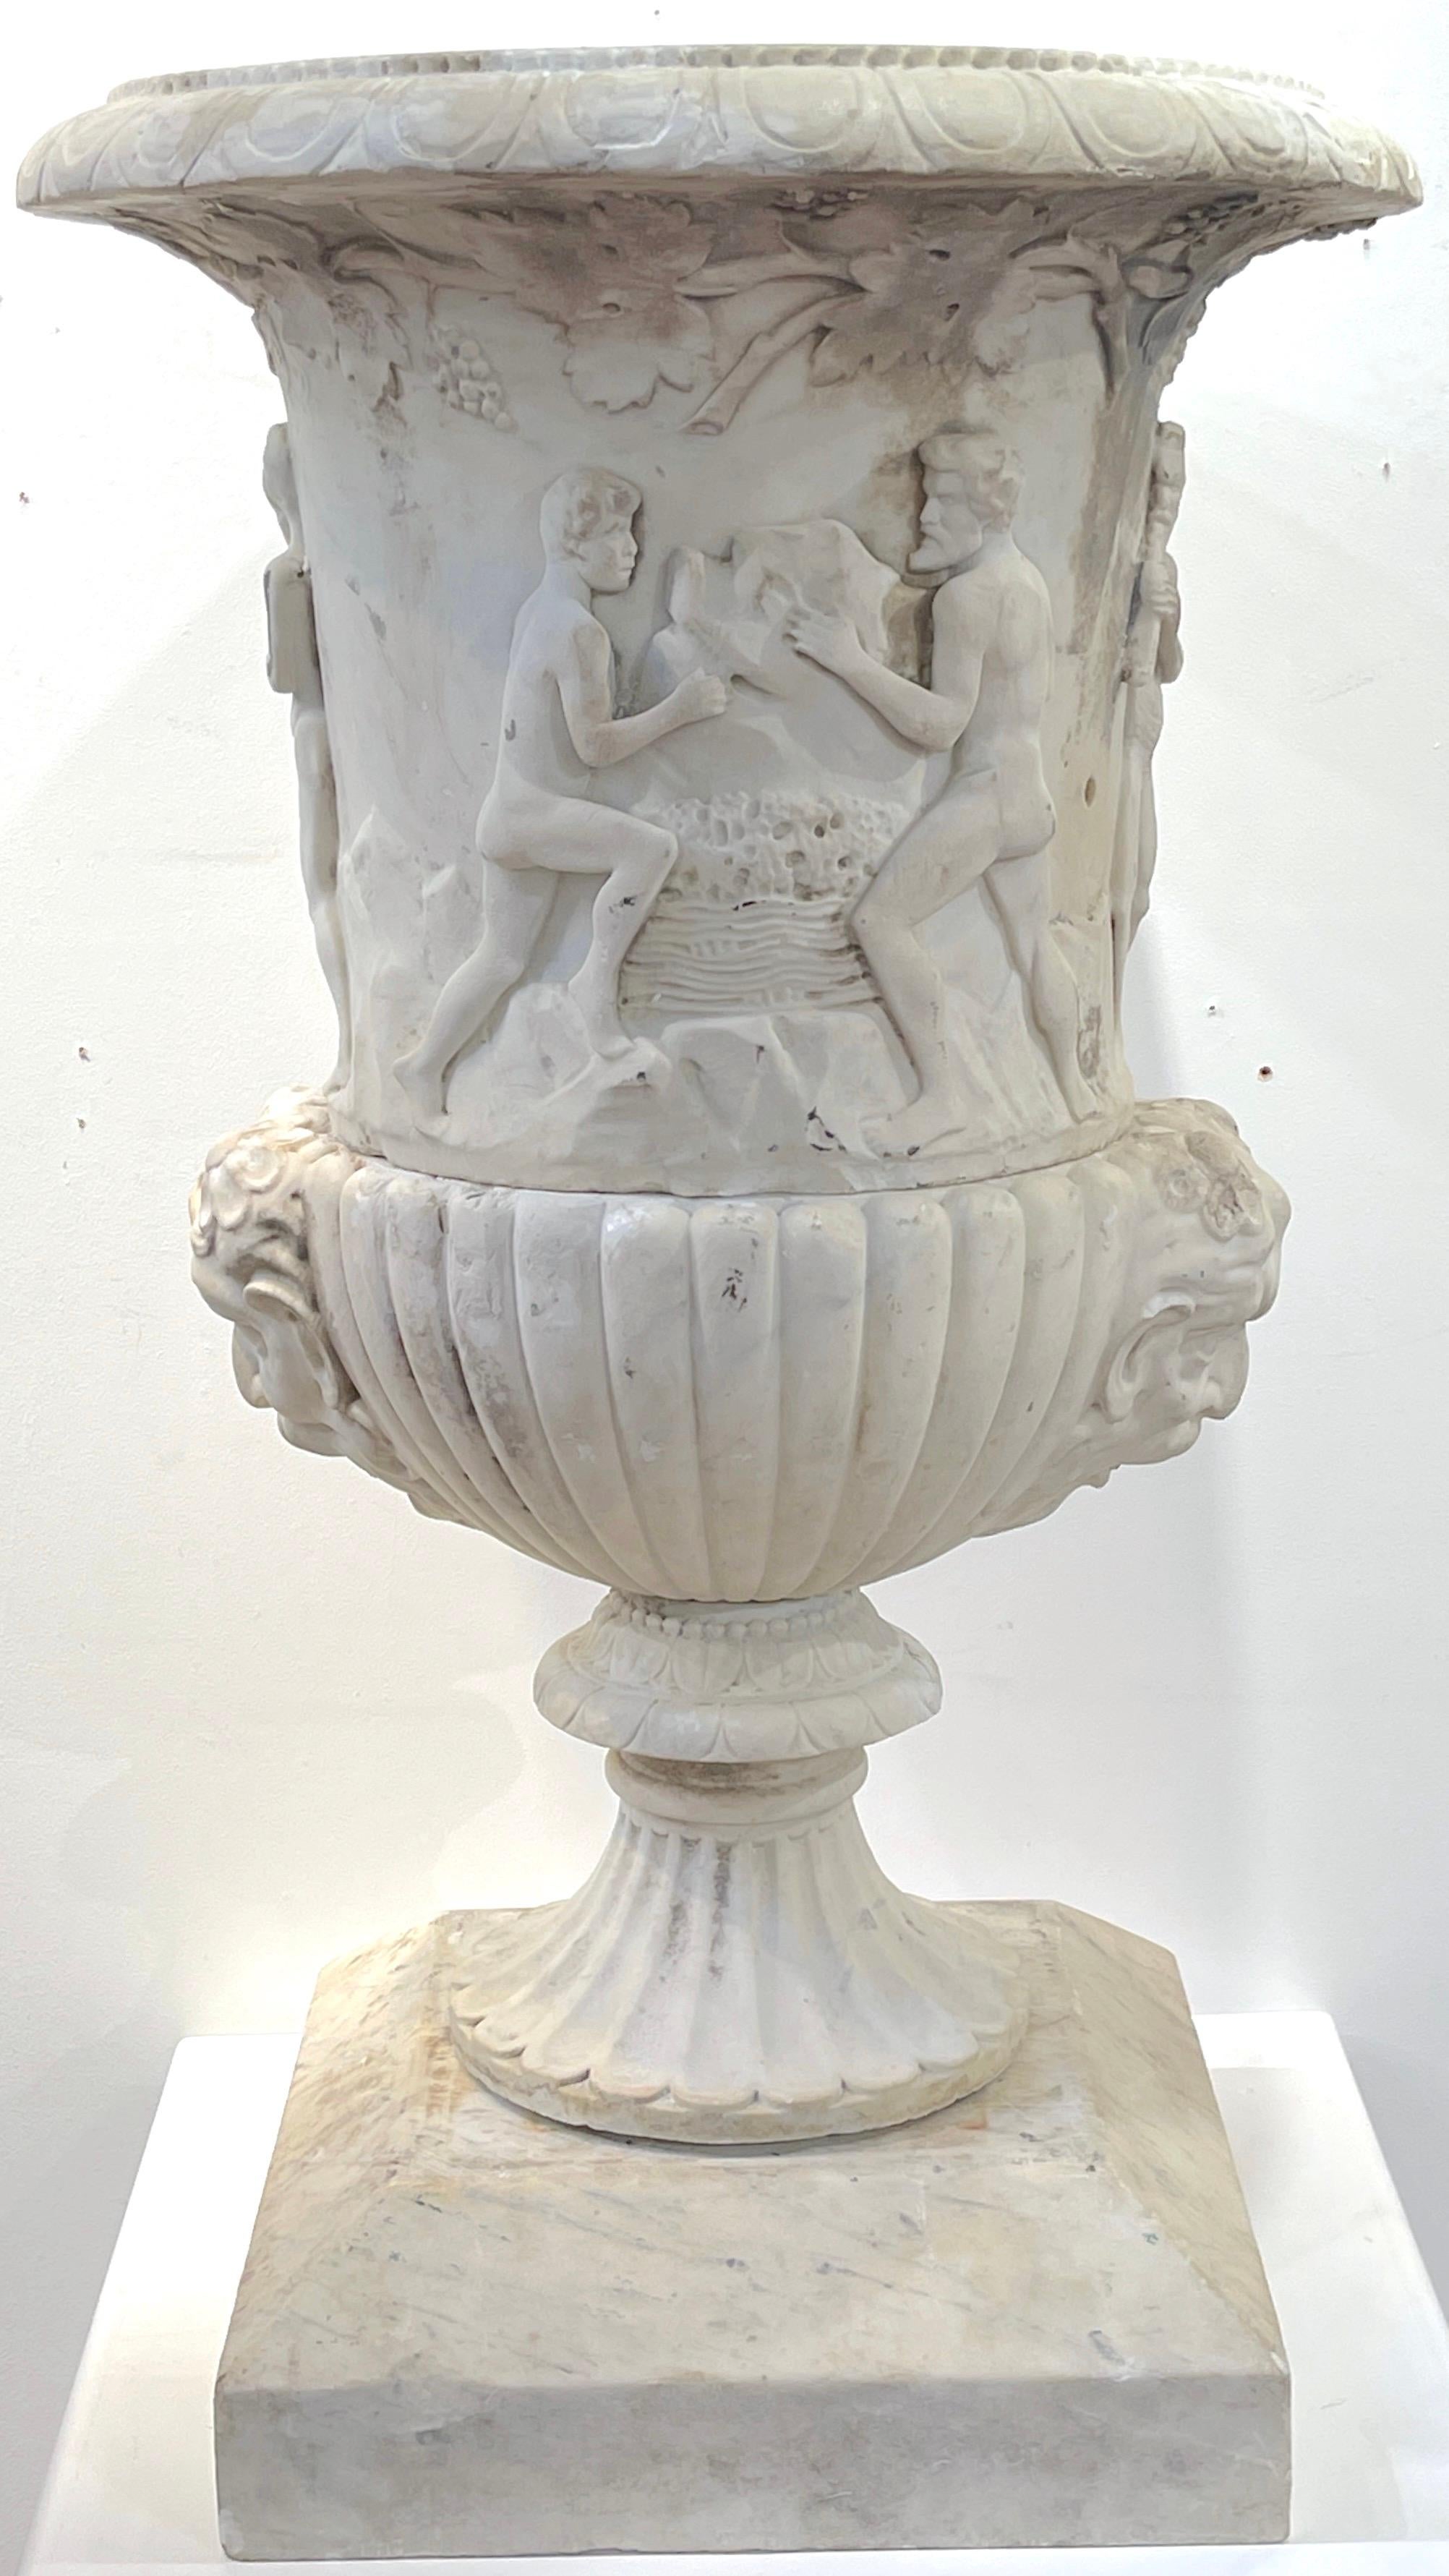 Pair of Antique Italian Carved Marble Bacchanalian Garden Urns, 19th C or Older For Sale 3